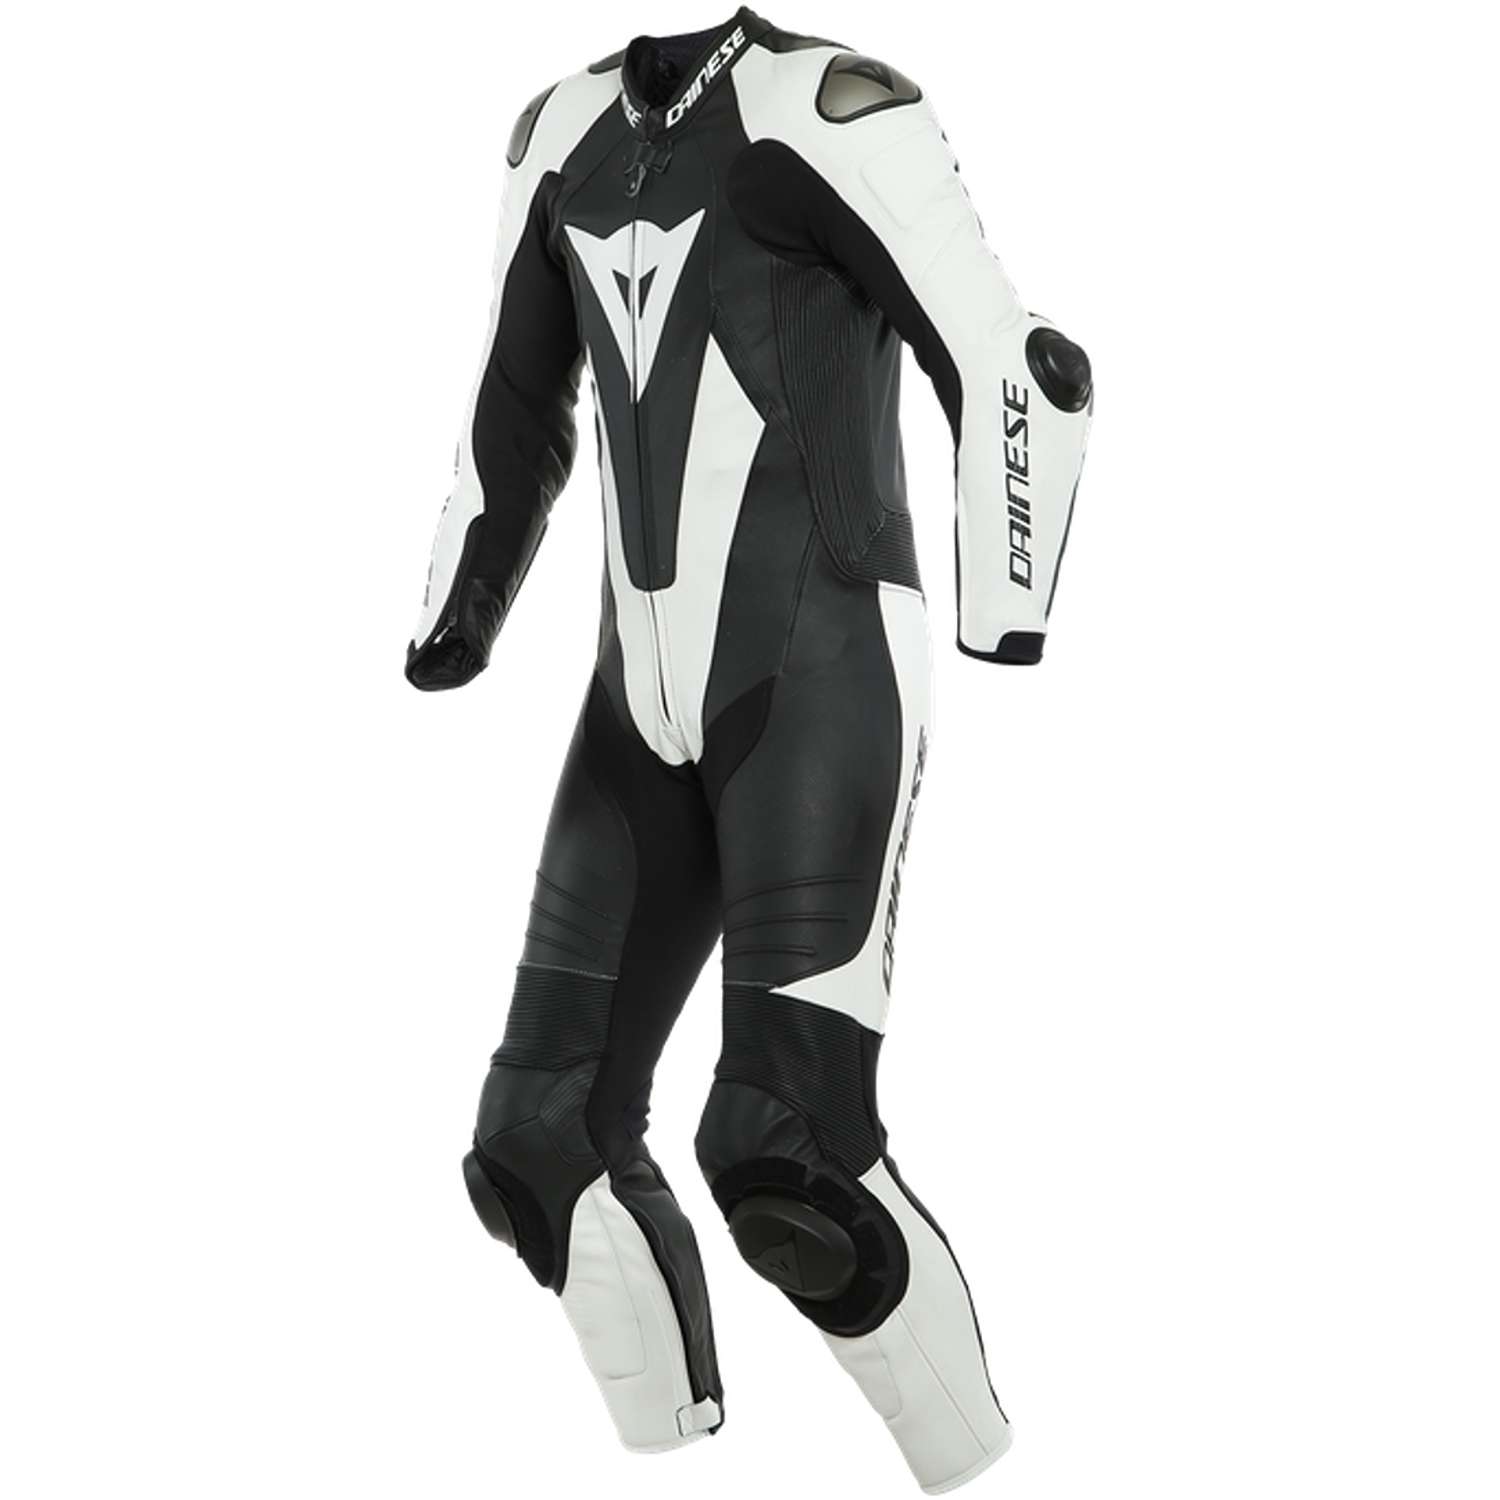 Image of Dainese Laguna Seca 5 1Pc Leather Suit Perf S/T Black White Size 24 ID 8051019258472